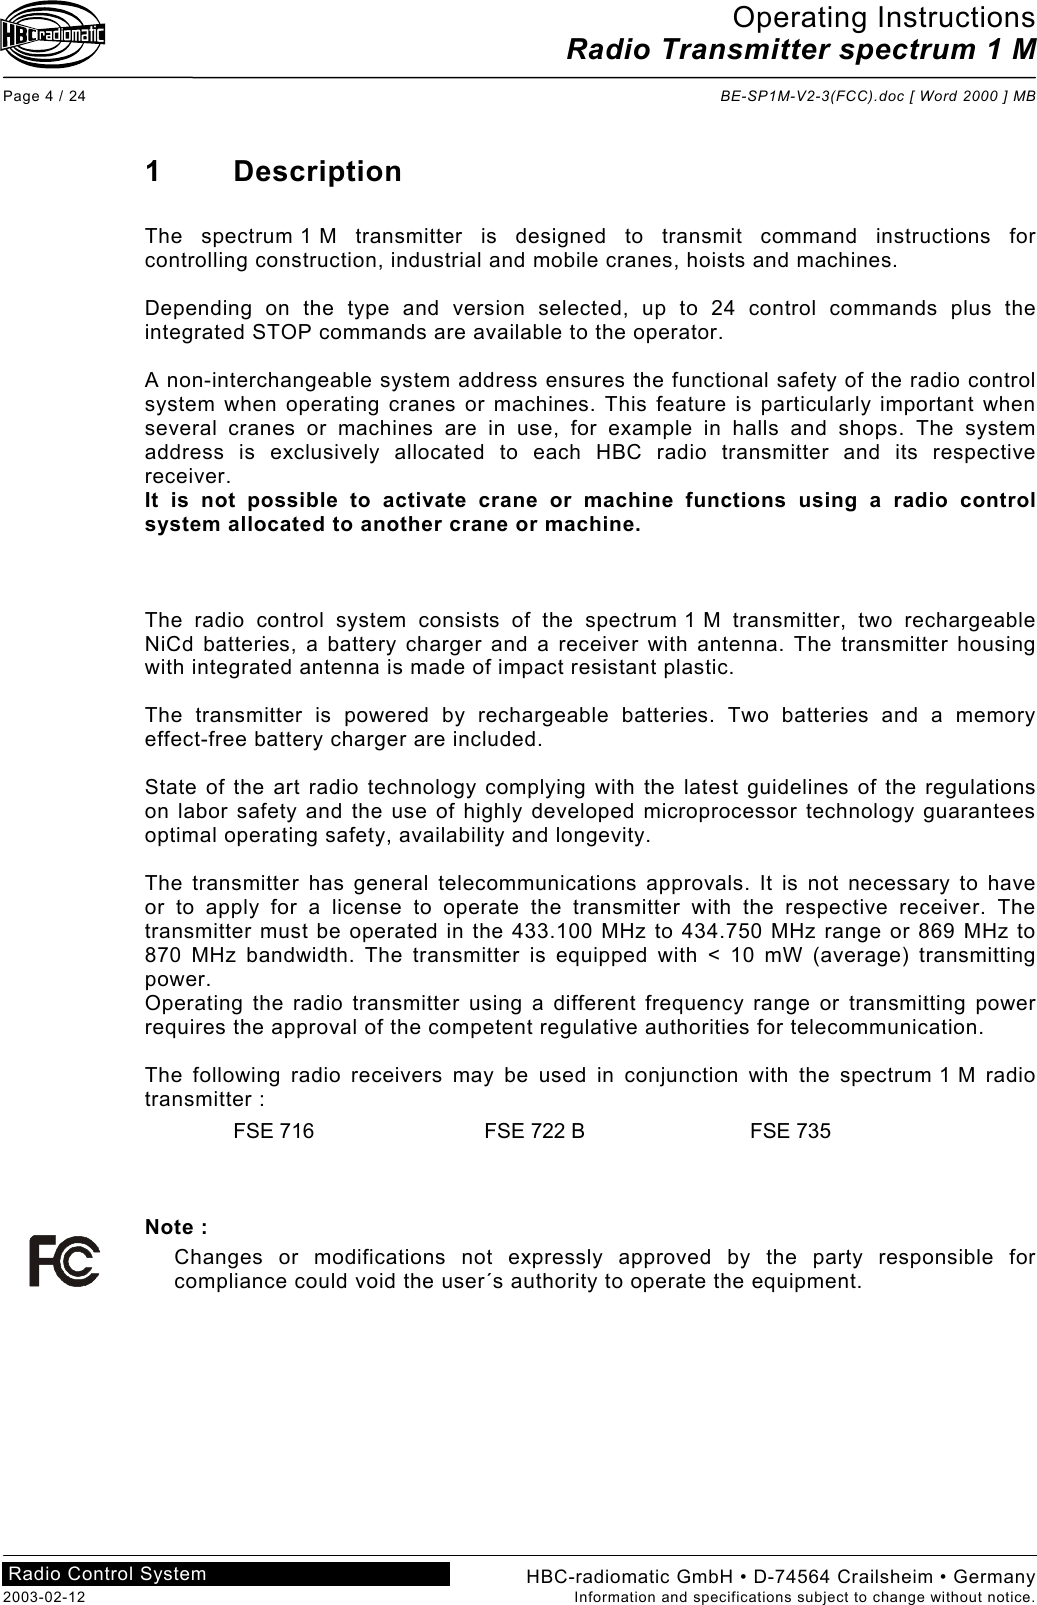 Operating Instructions Radio Transmitter spectrum 1 M  Page 4 / 24  BE-SP1M-V2-3(FCC).doc [ Word 2000 ] MB HBC-radiomatic GmbH • D-74564 Crailsheim • Germany 2003-02-12  Information and specifications subject to change without notice. Radio Control System     1 Description  The spectrum 1 M transmitter is designed to transmit command instructions for controlling construction, industrial and mobile cranes, hoists and machines.  Depending on the type and version selected, up to 24 control commands plus the integrated STOP commands are available to the operator.  A non-interchangeable system address ensures the functional safety of the radio control system when operating cranes or machines. This feature is particularly important when several cranes or machines are in use, for example in halls and shops. The system address is exclusively allocated to each HBC radio transmitter and its respective receiver. It is not possible to activate crane or machine functions using a radio control system allocated to another crane or machine.    The radio control system consists of the spectrum 1 M transmitter, two rechargeable NiCd batteries, a battery charger and a receiver with antenna. The transmitter housing with integrated antenna is made of impact resistant plastic.  The transmitter is powered by rechargeable batteries. Two batteries and a memory effect-free battery charger are included.  State of the art radio technology complying with the latest guidelines of the regulations on labor safety and the use of highly developed microprocessor technology guarantees optimal operating safety, availability and longevity.  The transmitter has general telecommunications approvals. It is not necessary to have or to apply for a license to operate the transmitter with the respective receiver. The transmitter must be operated in the 433.100 MHz to 434.750 MHz range or 869 MHz to 870 MHz bandwidth. The transmitter is equipped with &lt; 10 mW (average) transmitting power. Operating the radio transmitter using a different frequency range or transmitting power requires the approval of the competent regulative authorities for telecommunication.  The following radio receivers may be used in conjunction with the spectrum 1 M radio transmitter : FSE 716  FSE 722 B  FSE 735    Note : Changes or modifications not expressly approved by the party responsible for compliance could void the user´s authority to operate the equipment.    